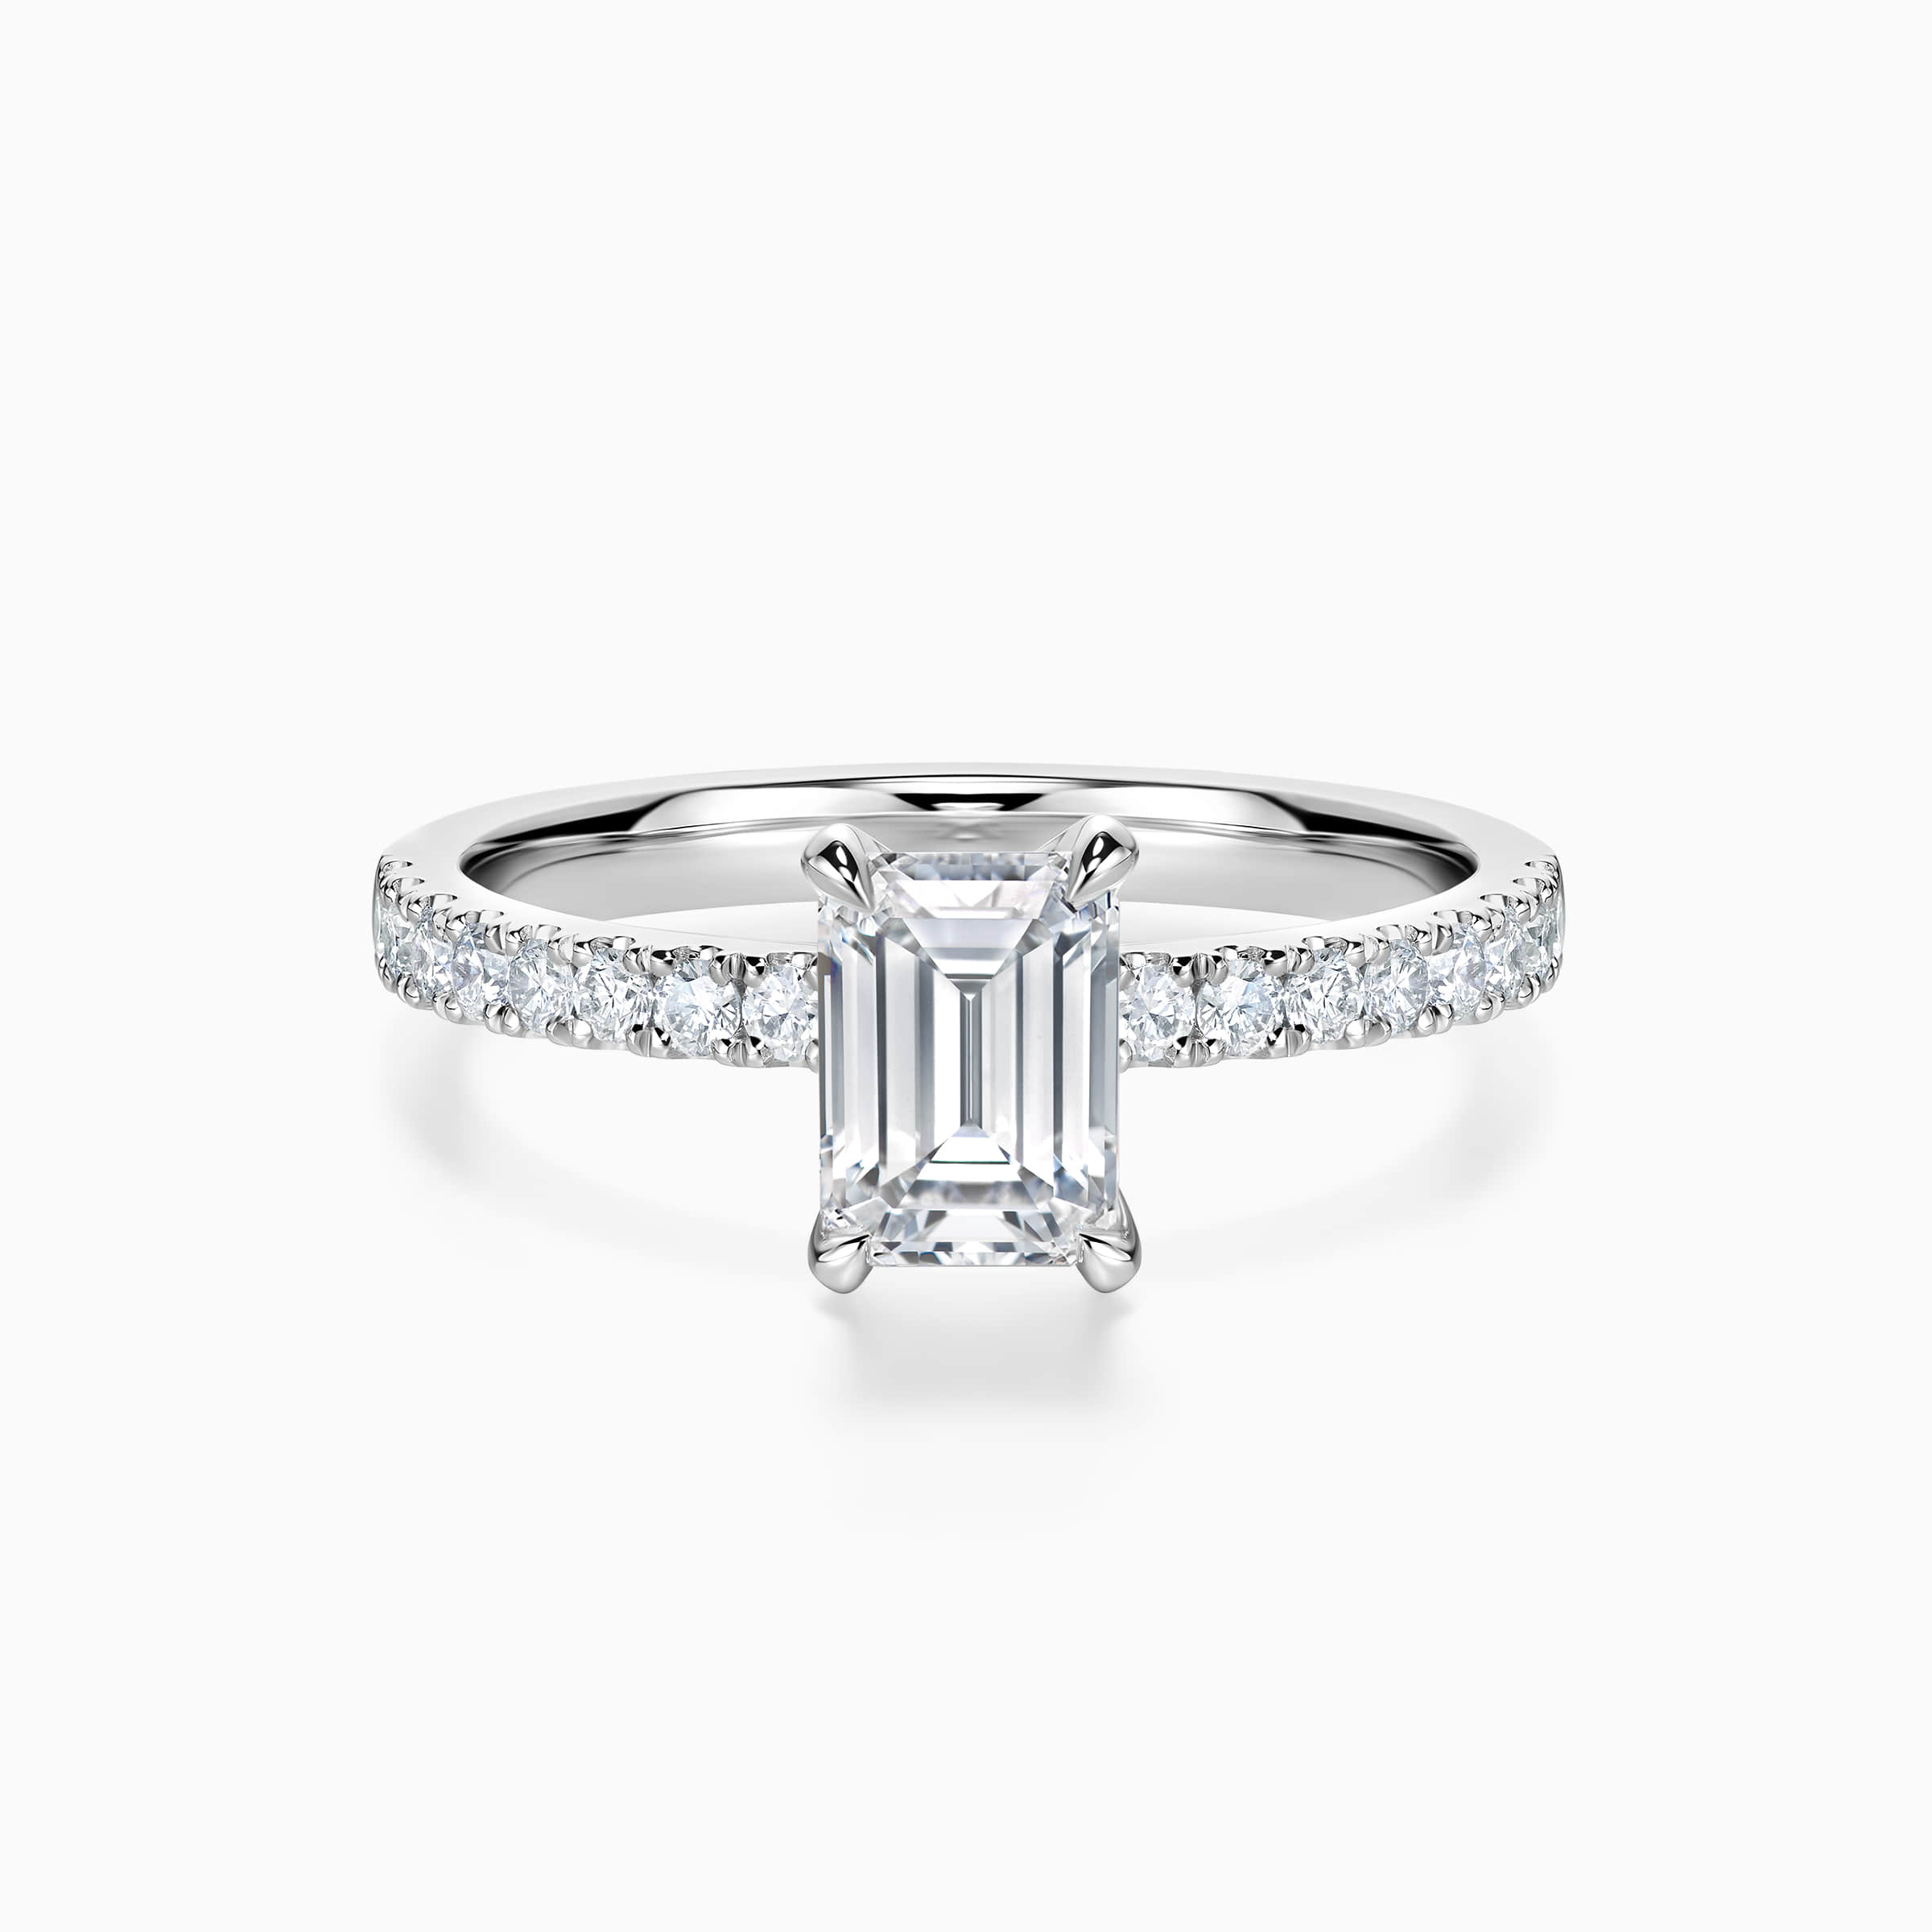 Darry Ring emerald cut promise ring in white gold